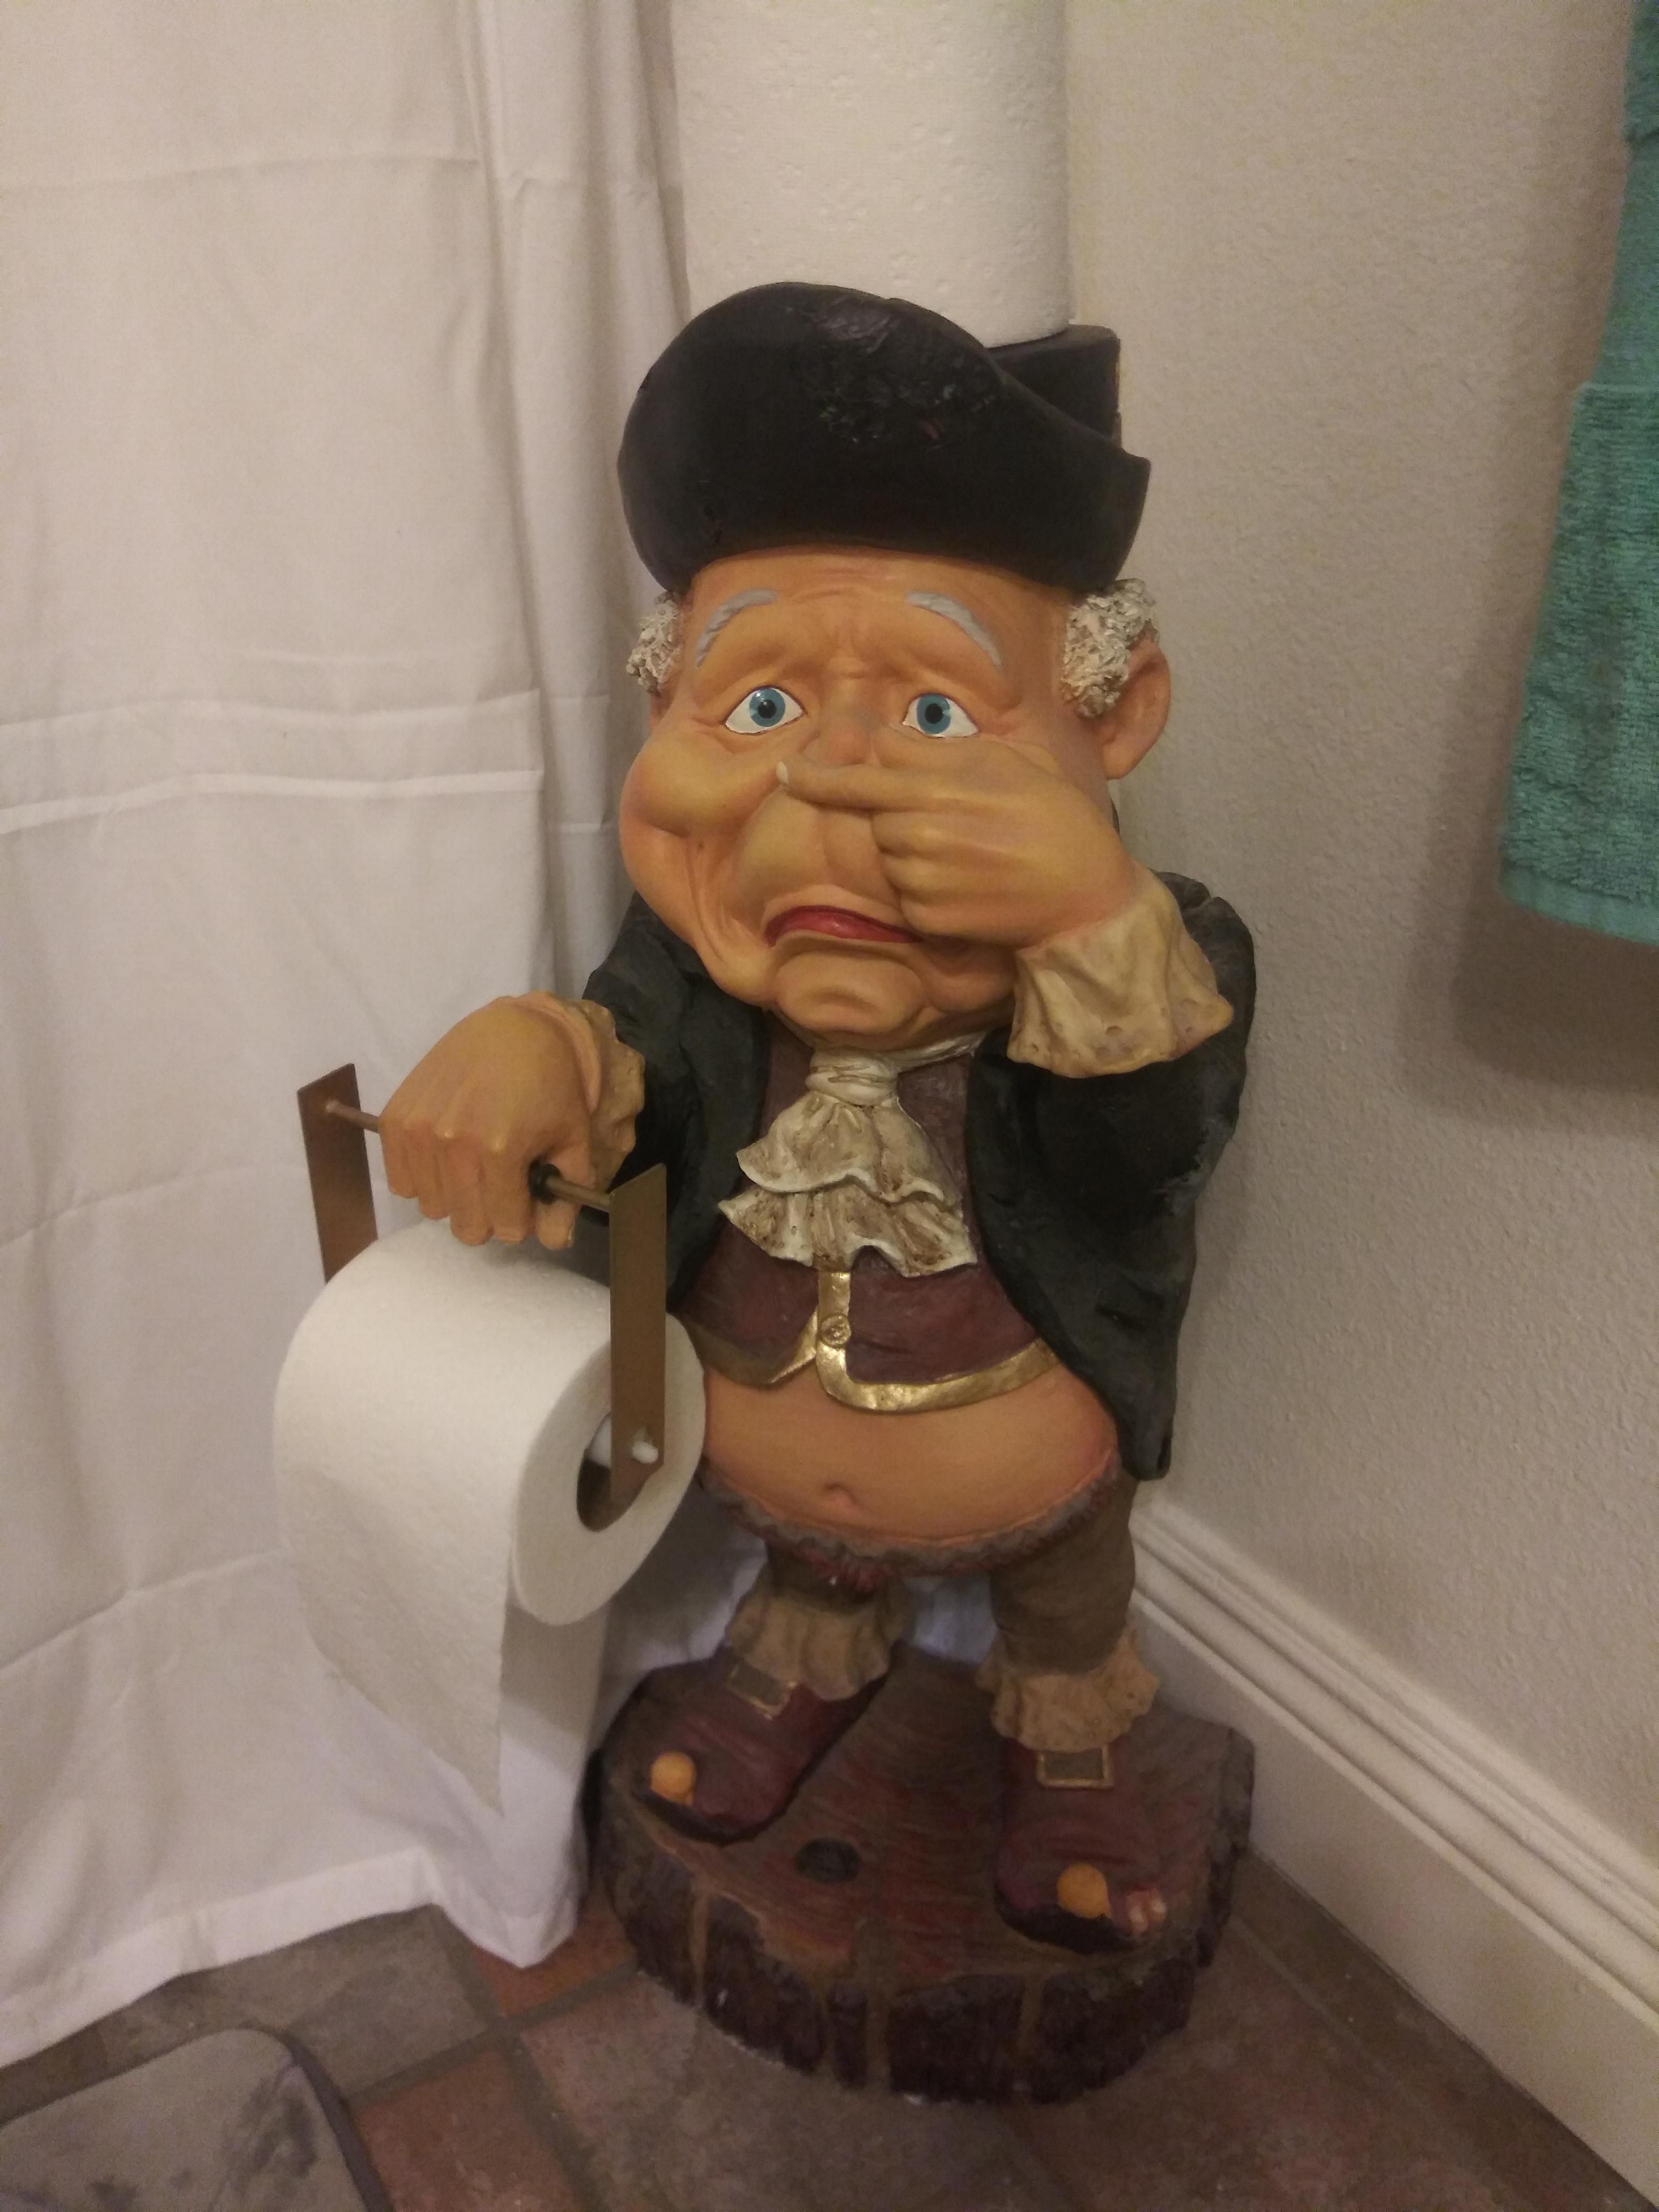 I found a new toilet paper holder yesterday.